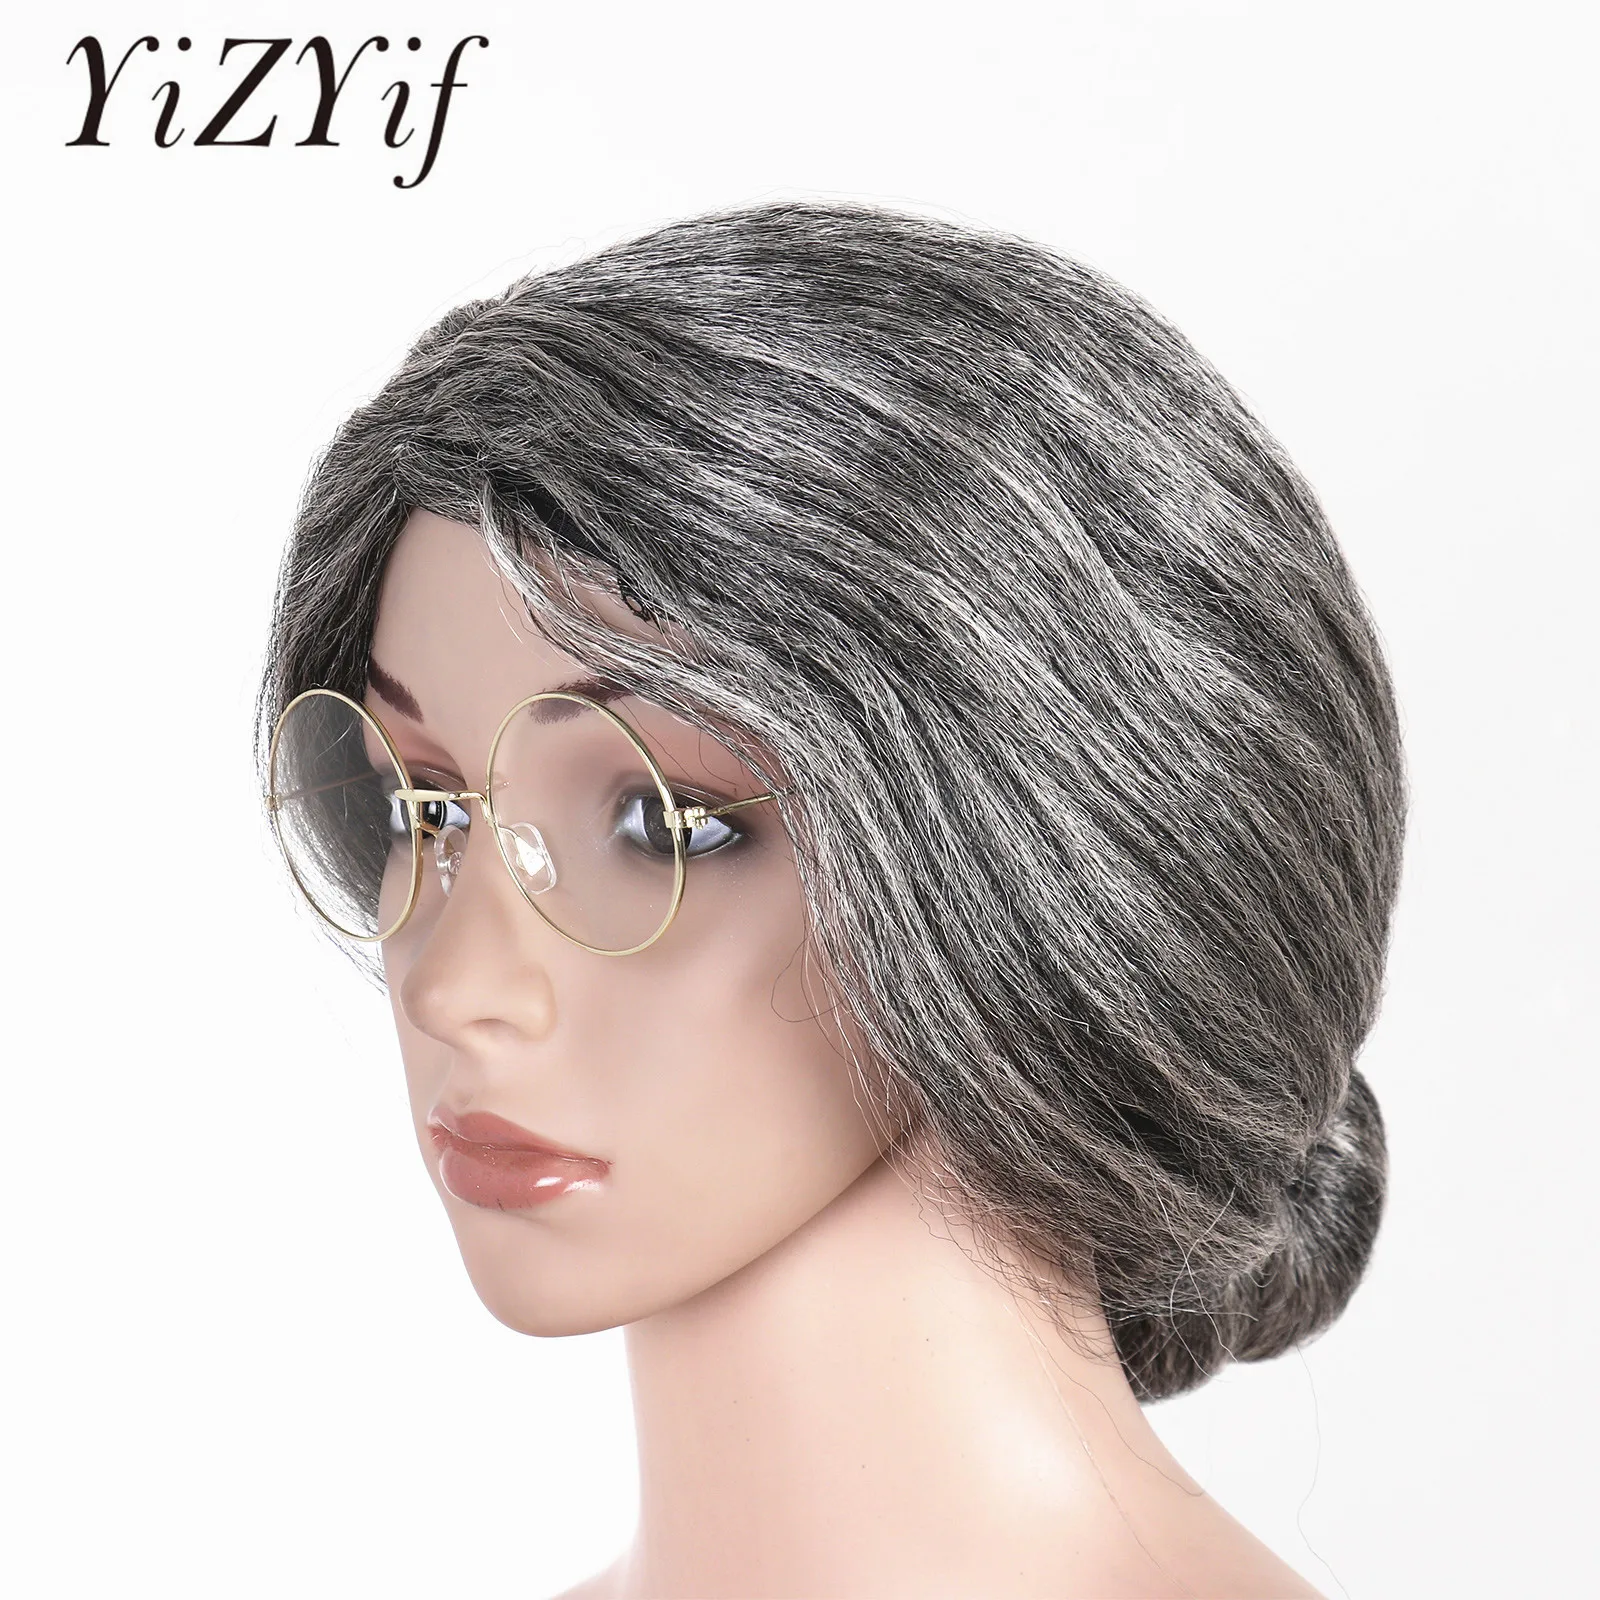 Old Woman Silver Hair Christmas Headwear Dress Up Show Wig, Madea Granny Glasses Cosplay Great Santa Claus Grandmother Hairpiece